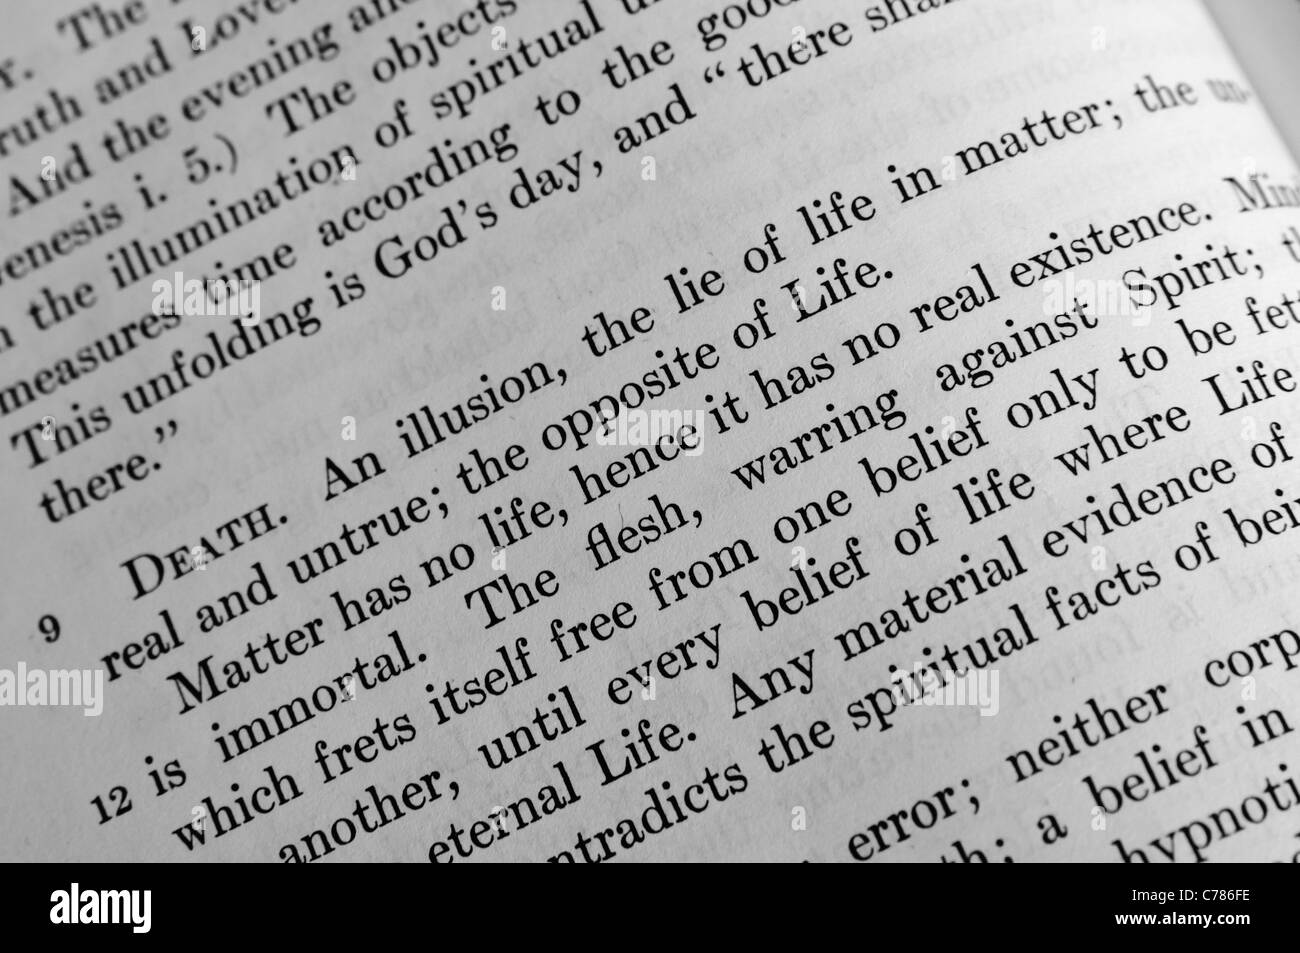 Section on 'Death' in the Christian Science 'Science and Health' by Mary Baker Eddy Stock Photo